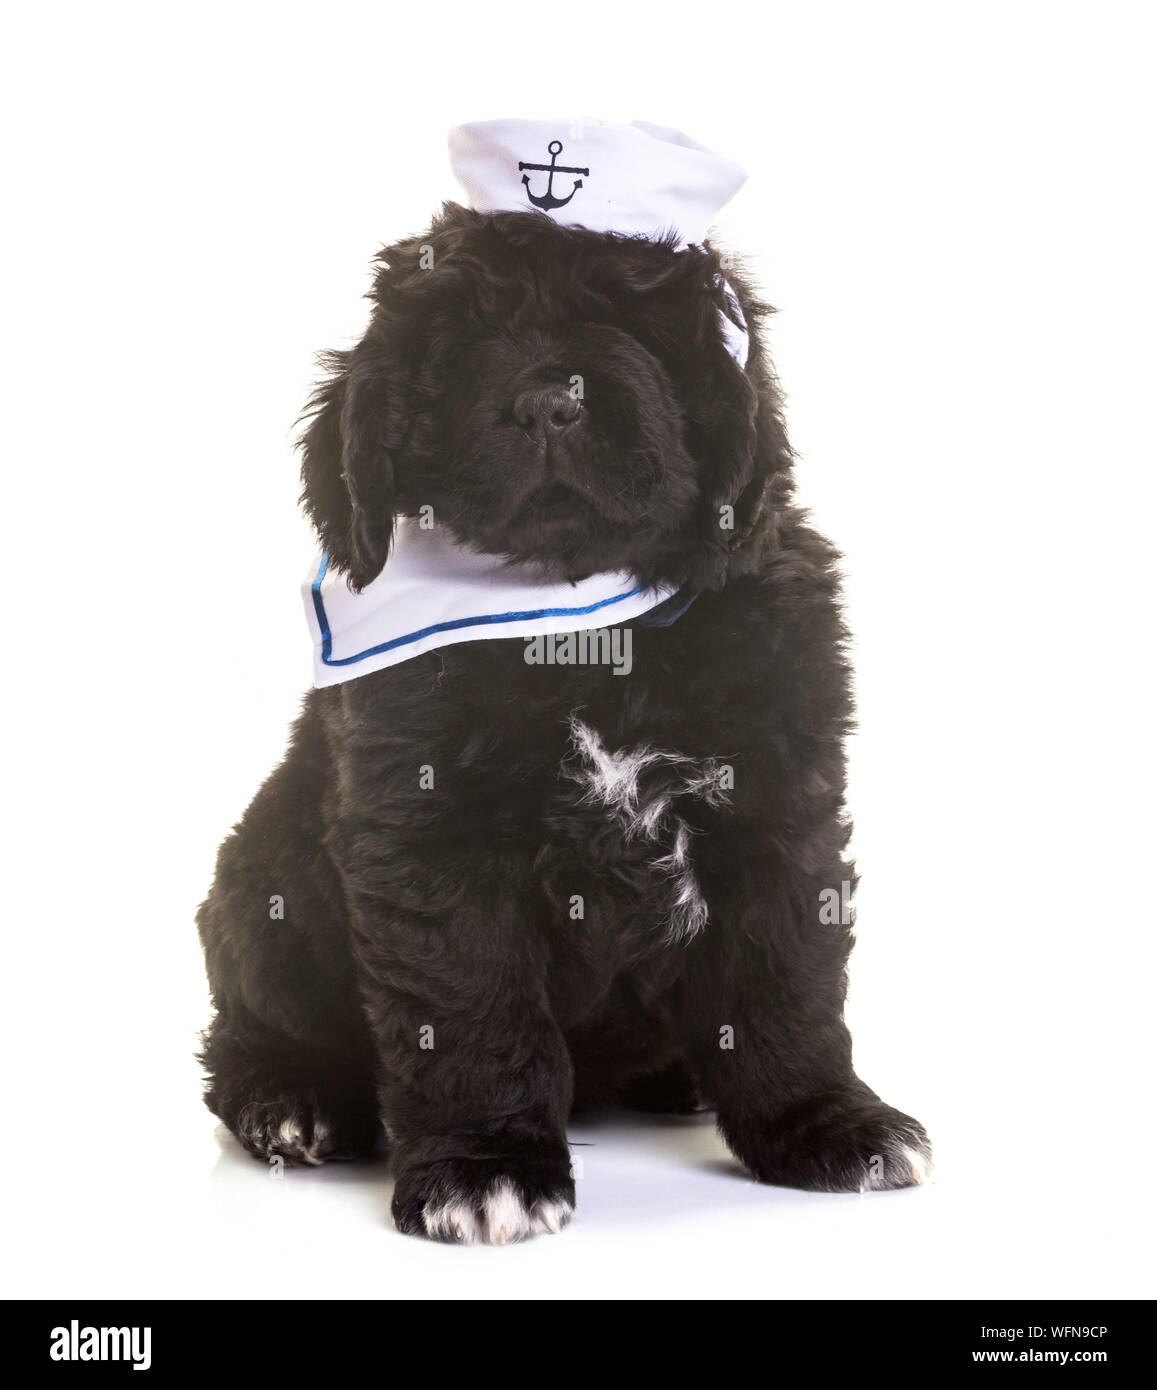 Black Puppy Wearing Sailor Hat While Sitting Against White Background Stock Photo